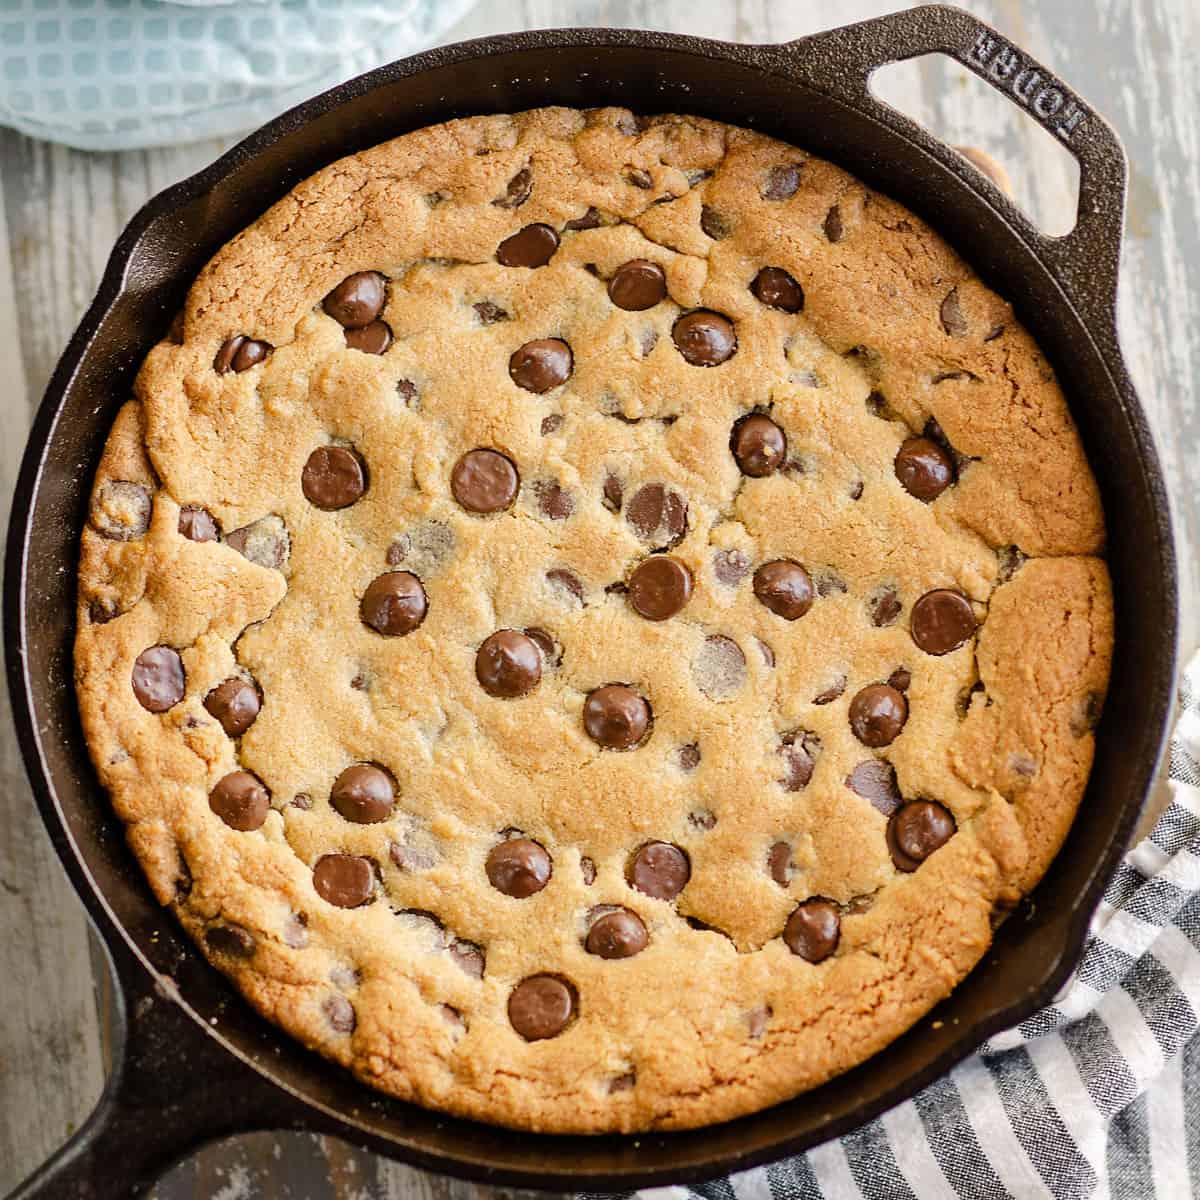 https://www.thecreativebite.com/wp-content/uploads/2023/02/Skillet-Chocolate-Chip-Cookies-feature.jpg